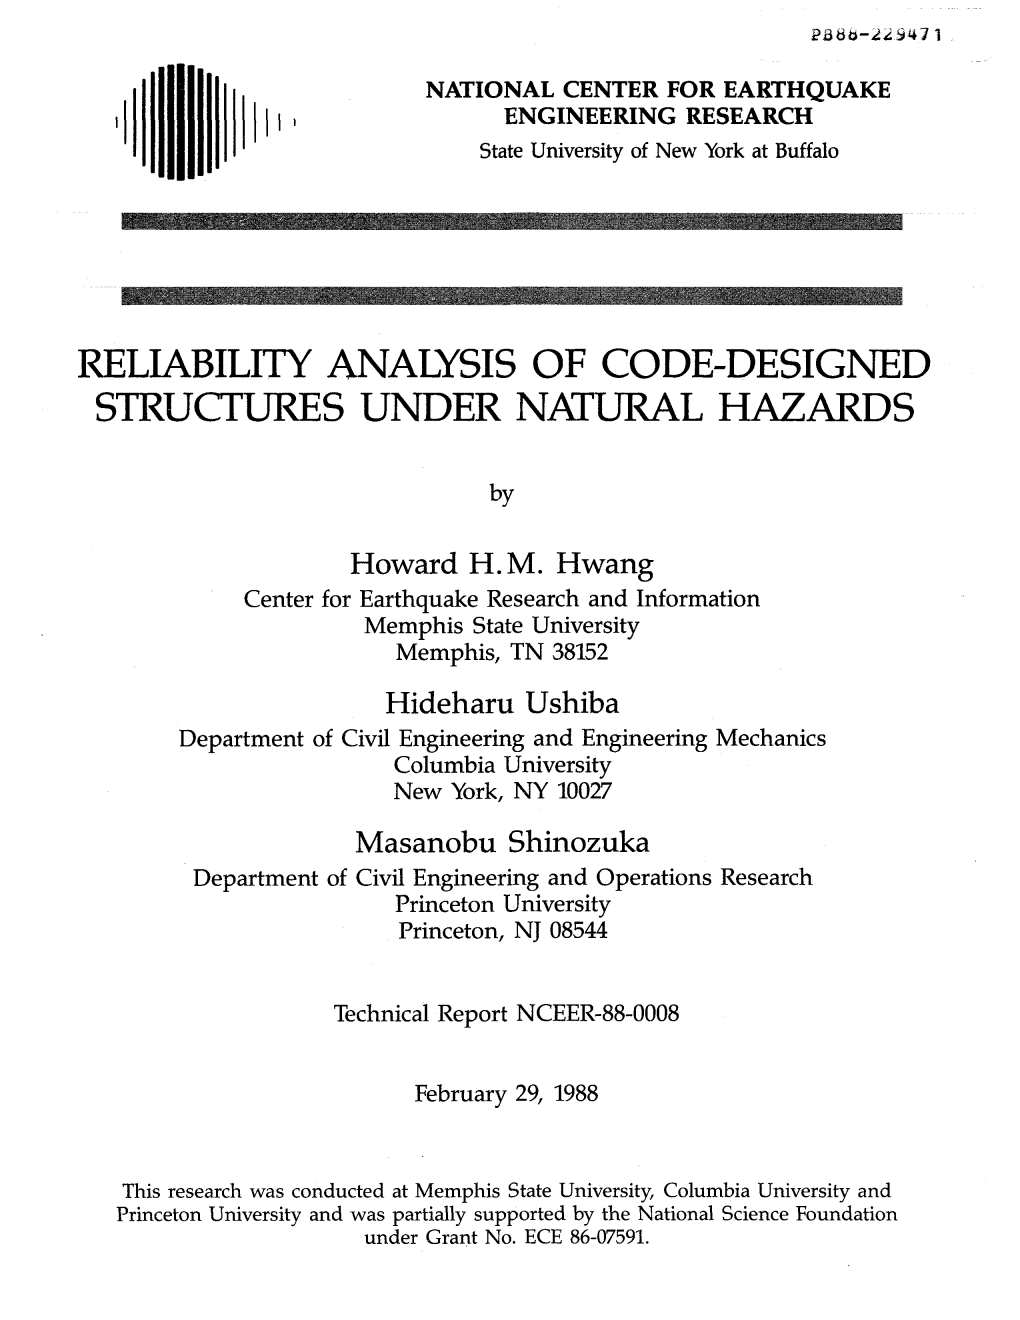 Reliability Analysis of Code-Designed Structures Under Natural Hazards